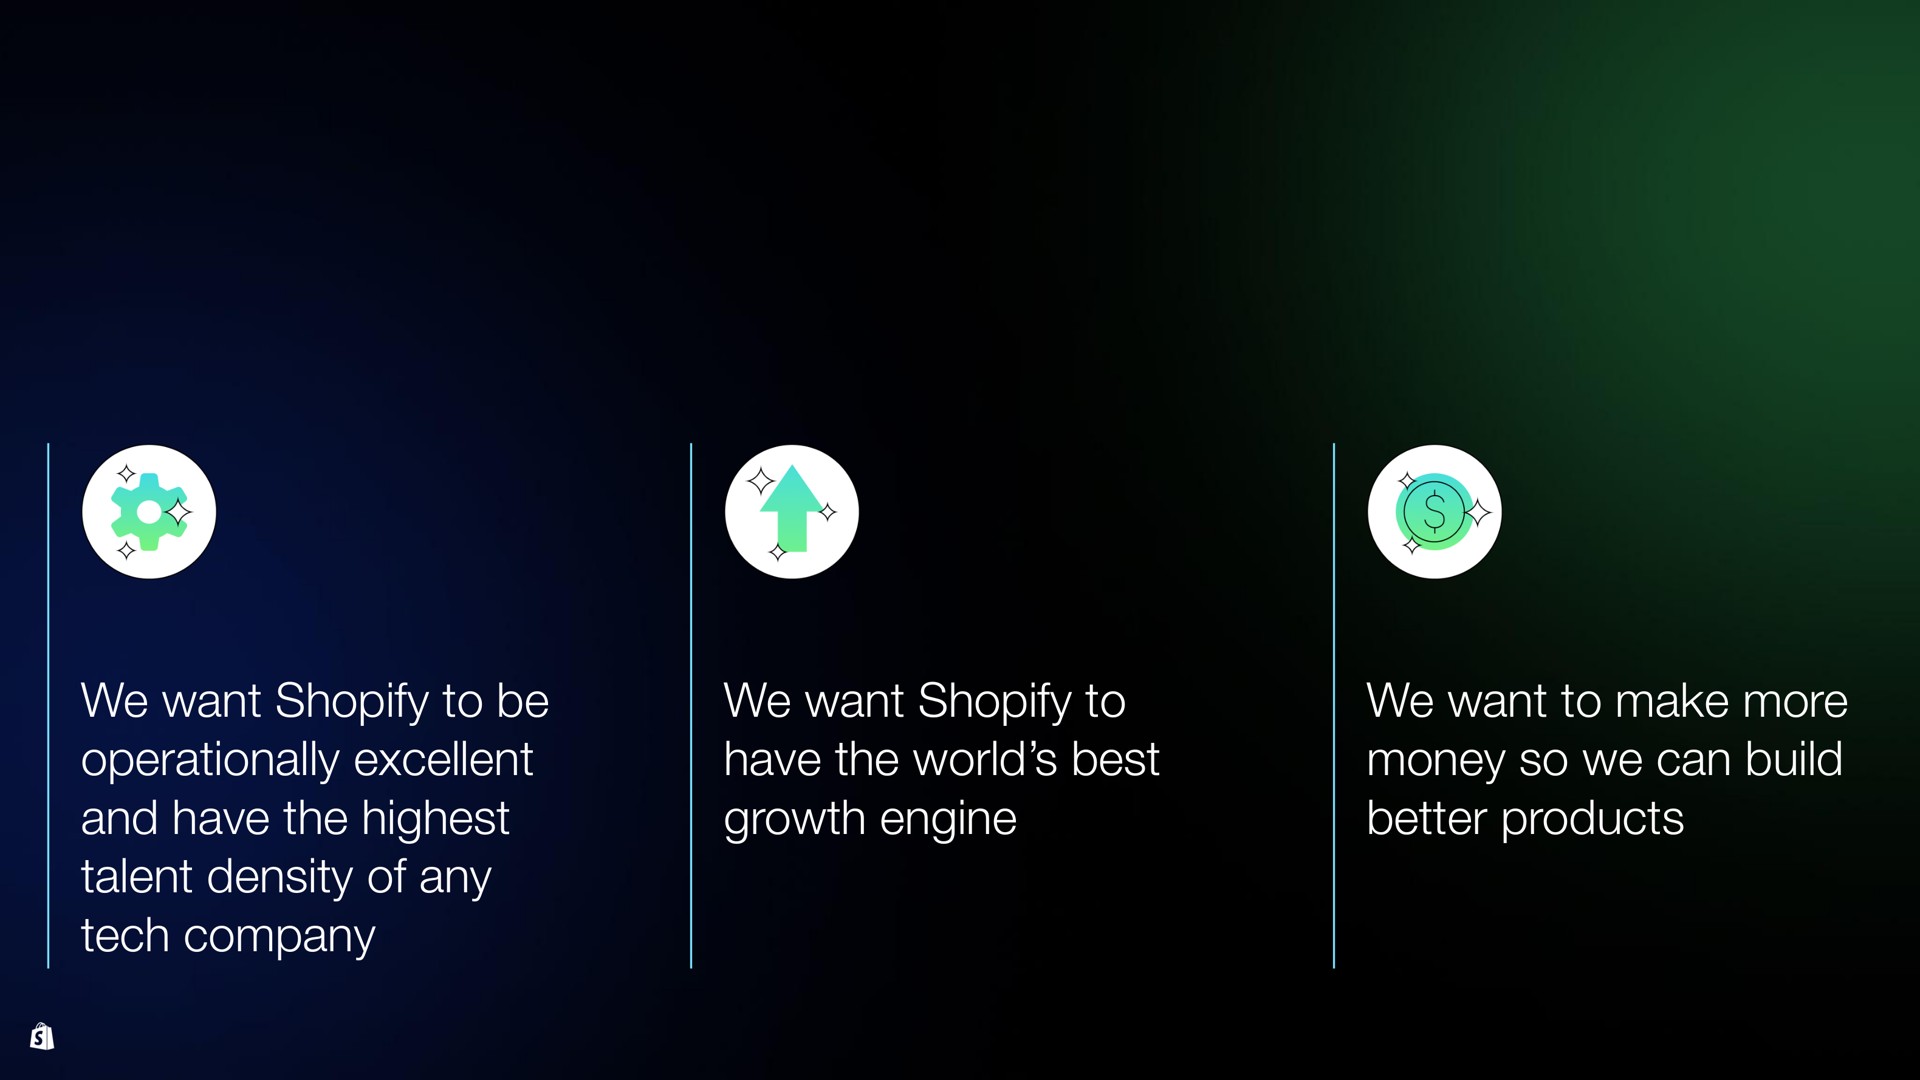 we want to be excellent and have the highest talent density of any tech company we want to have the world best growth engine we want to make more money so we can build better products | Shopify